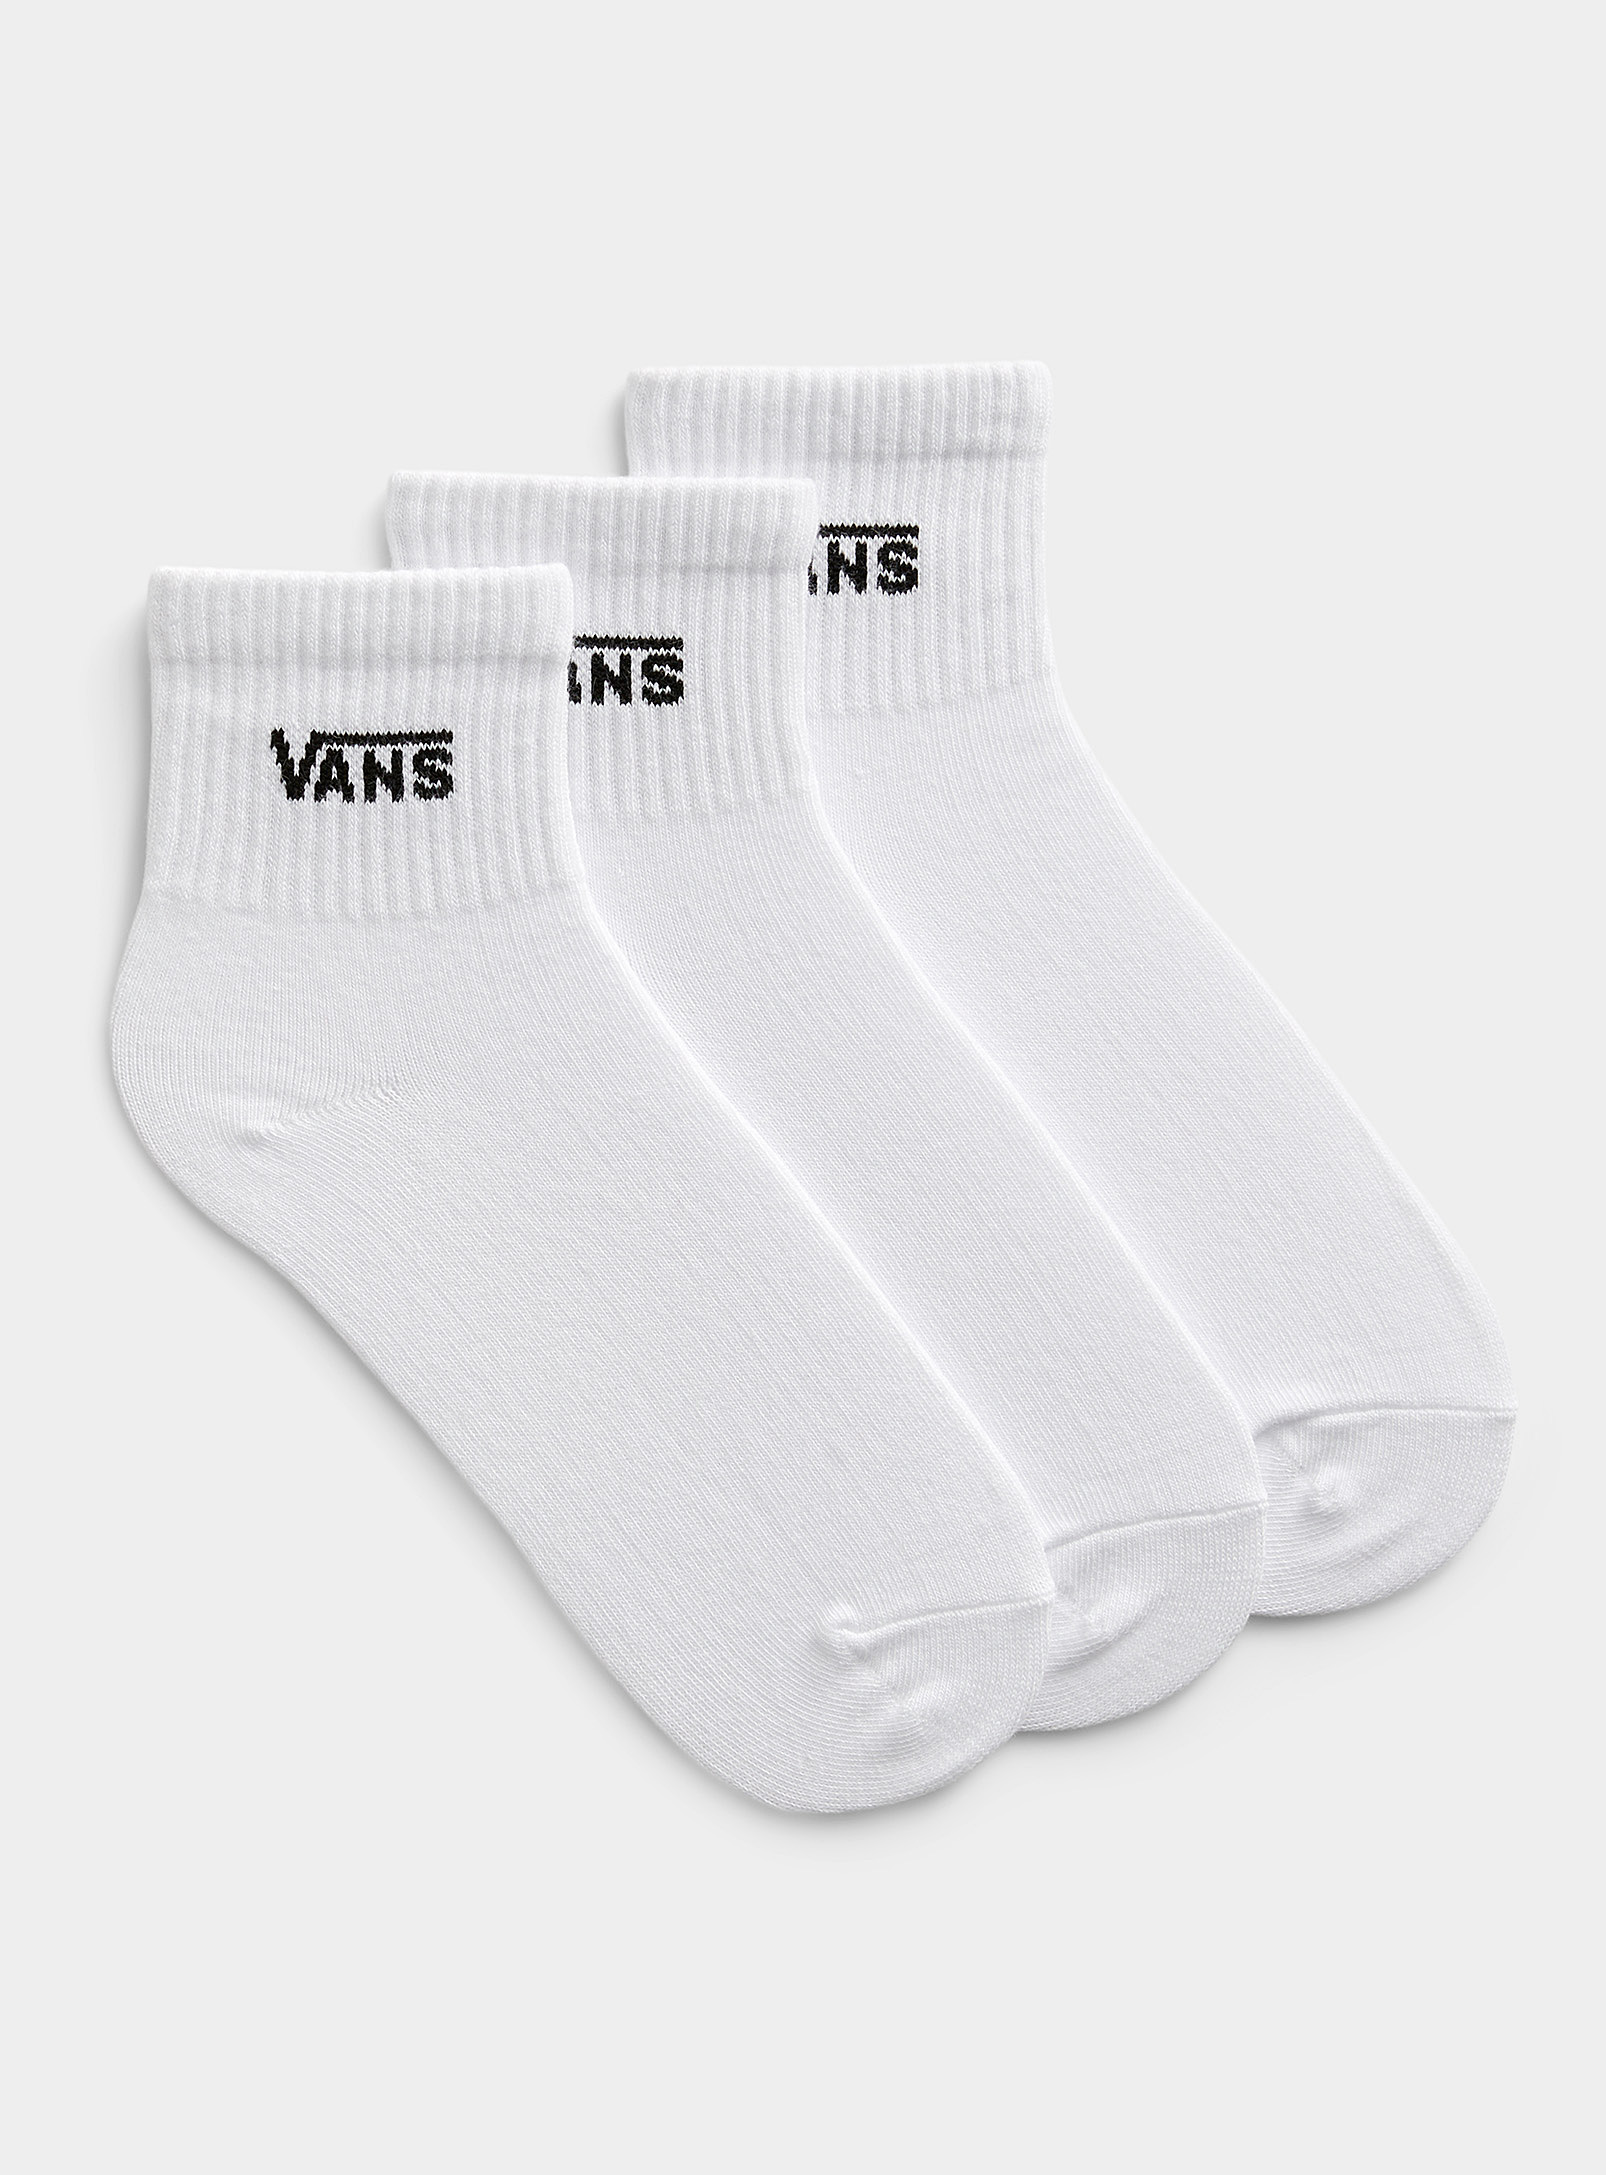 Vans Ribbed Signature Ankle Socks Set Of 3 In White